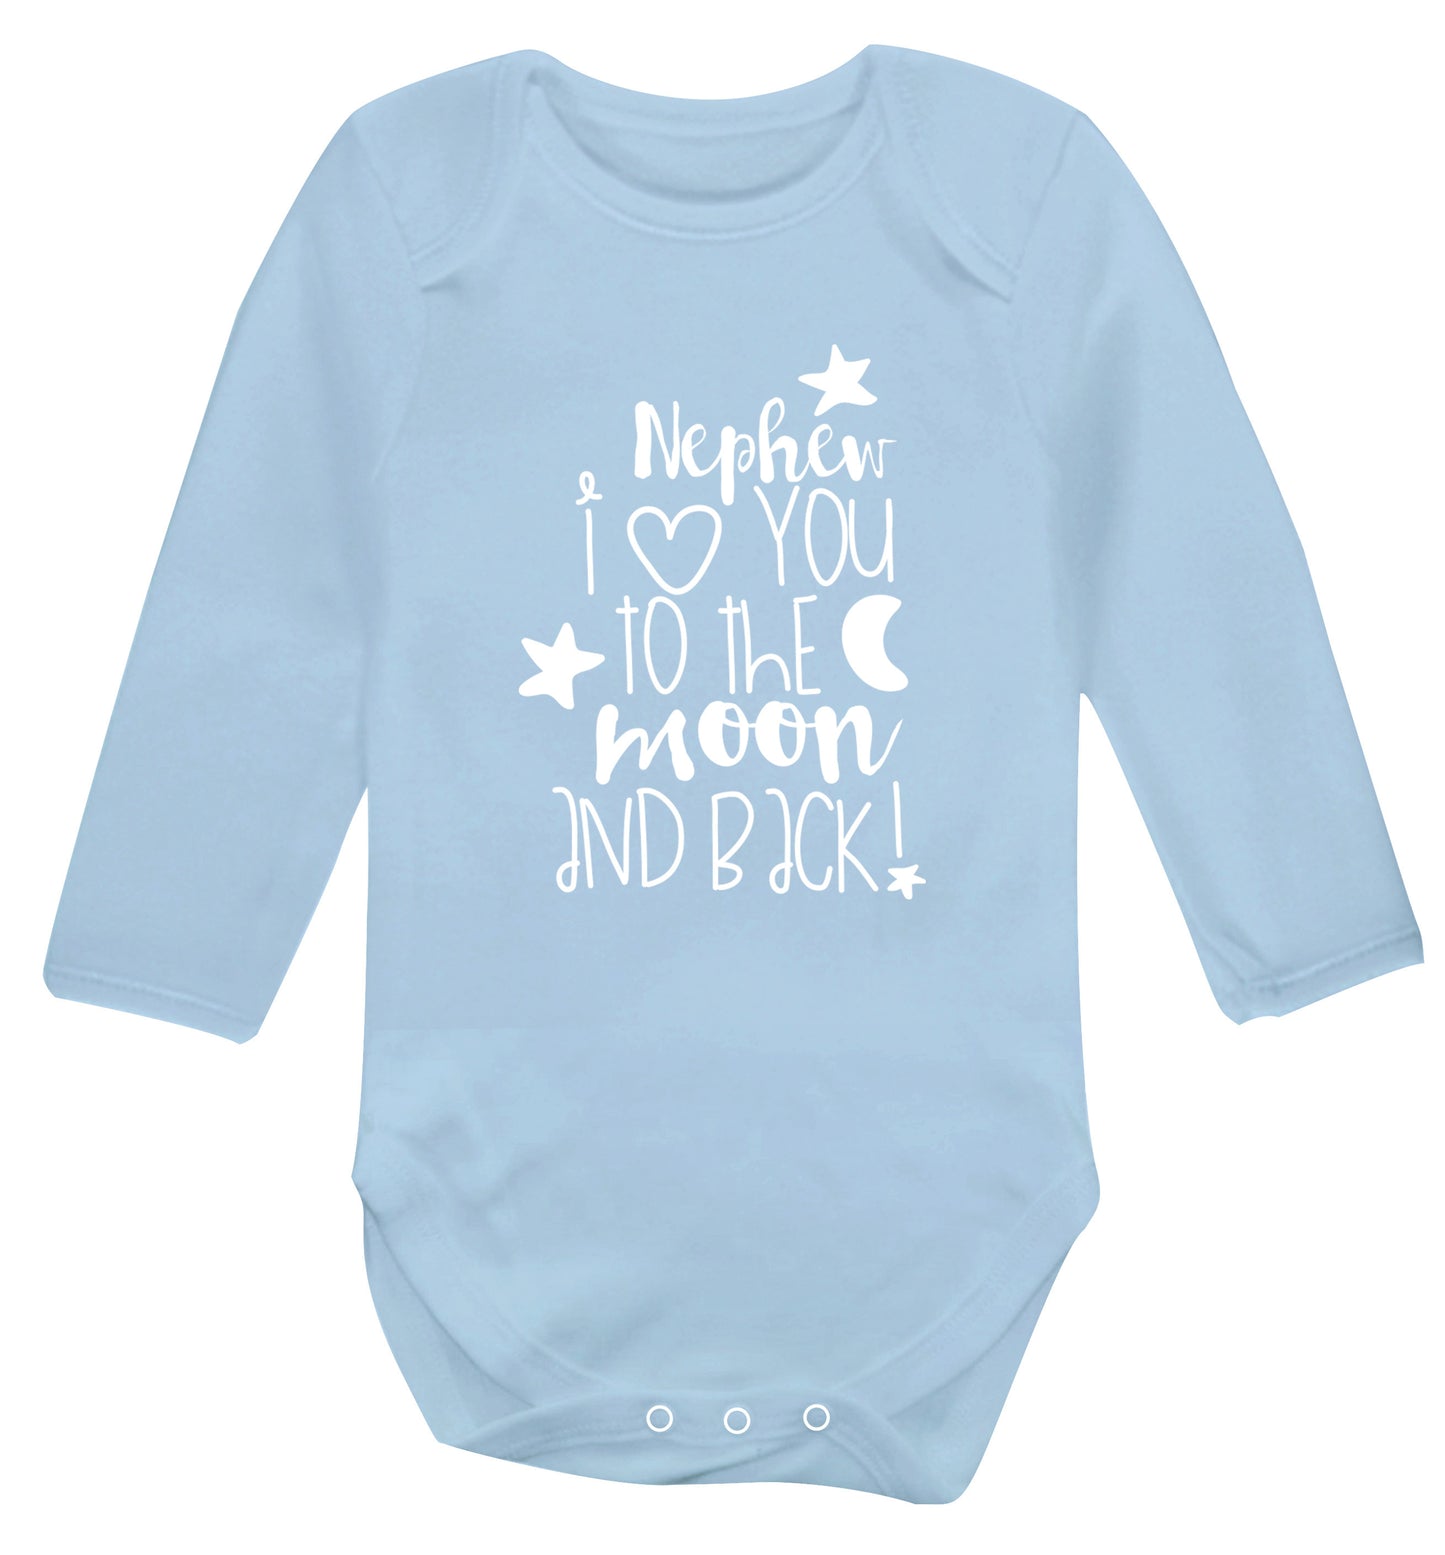 Nephew I love you to the moon and back Baby Vest long sleeved pale blue 6-12 months